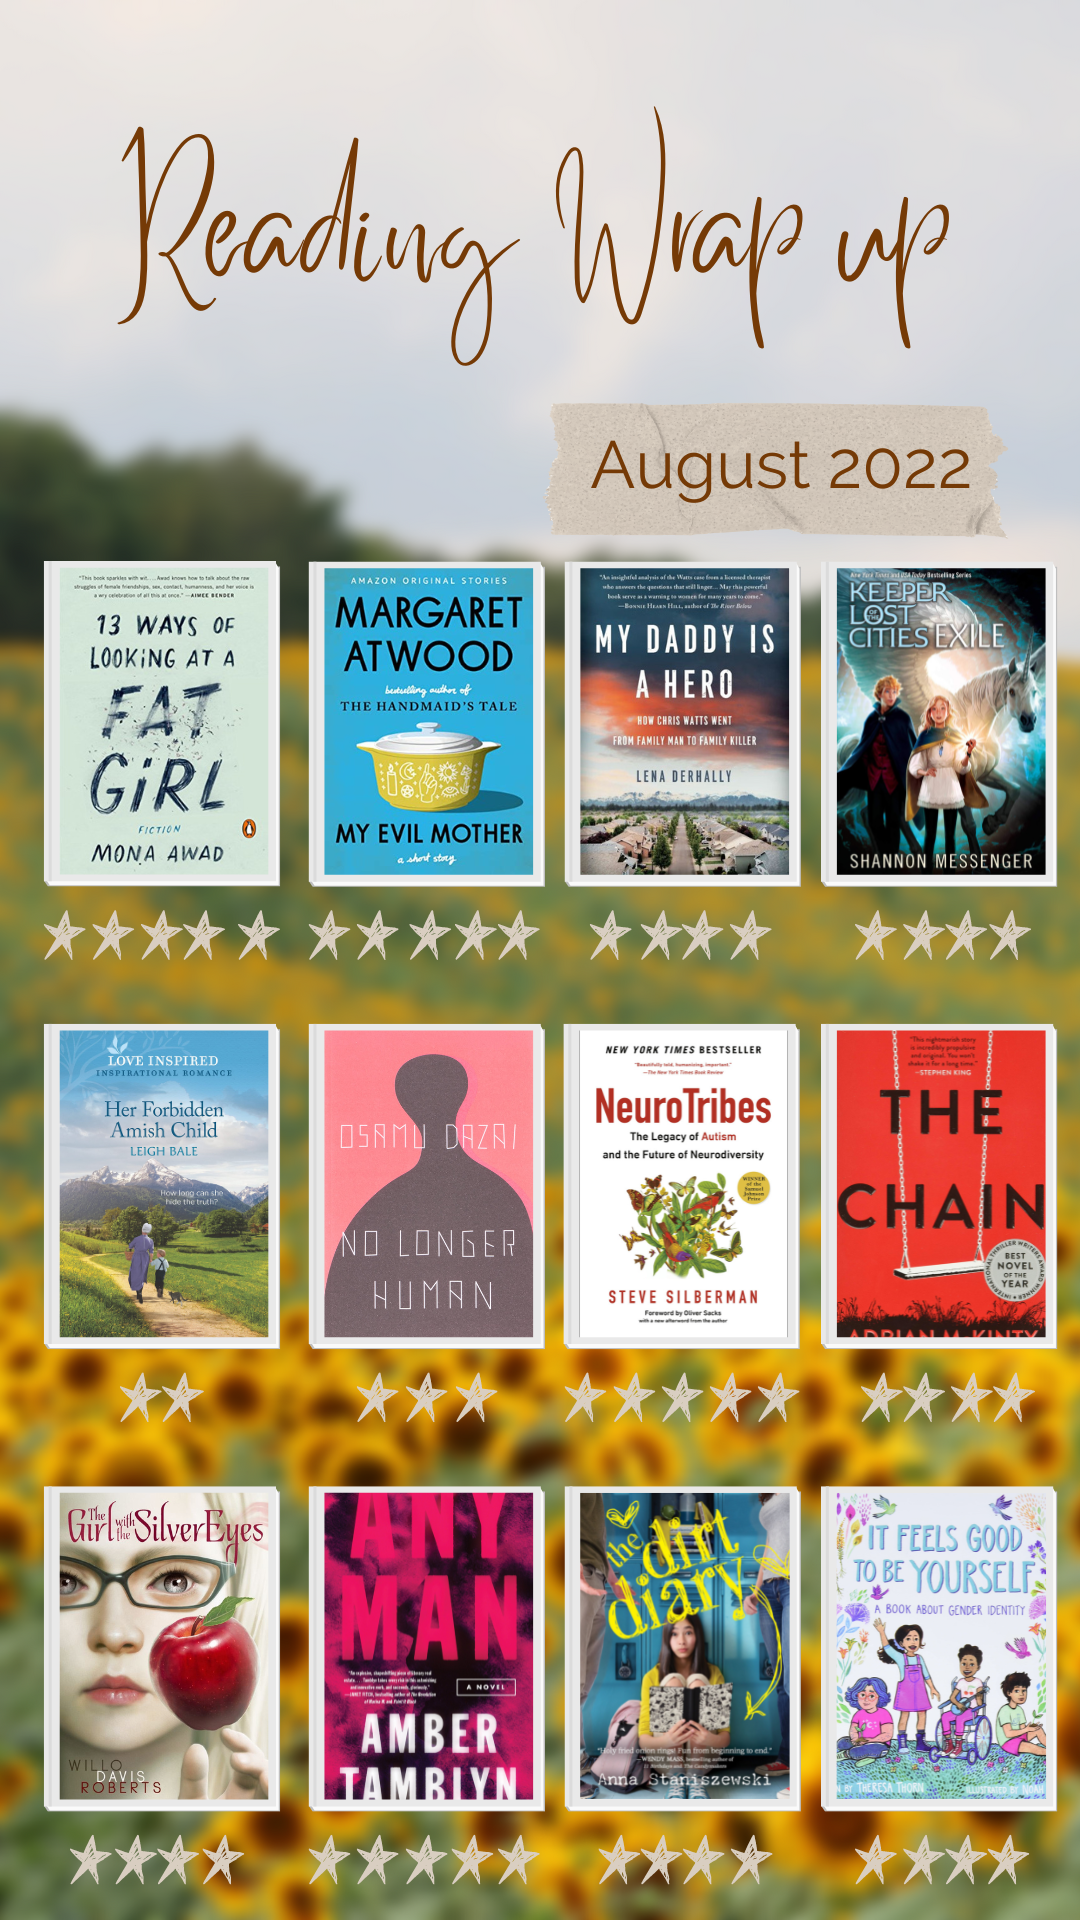 image showing covers of the book I read during August 2022